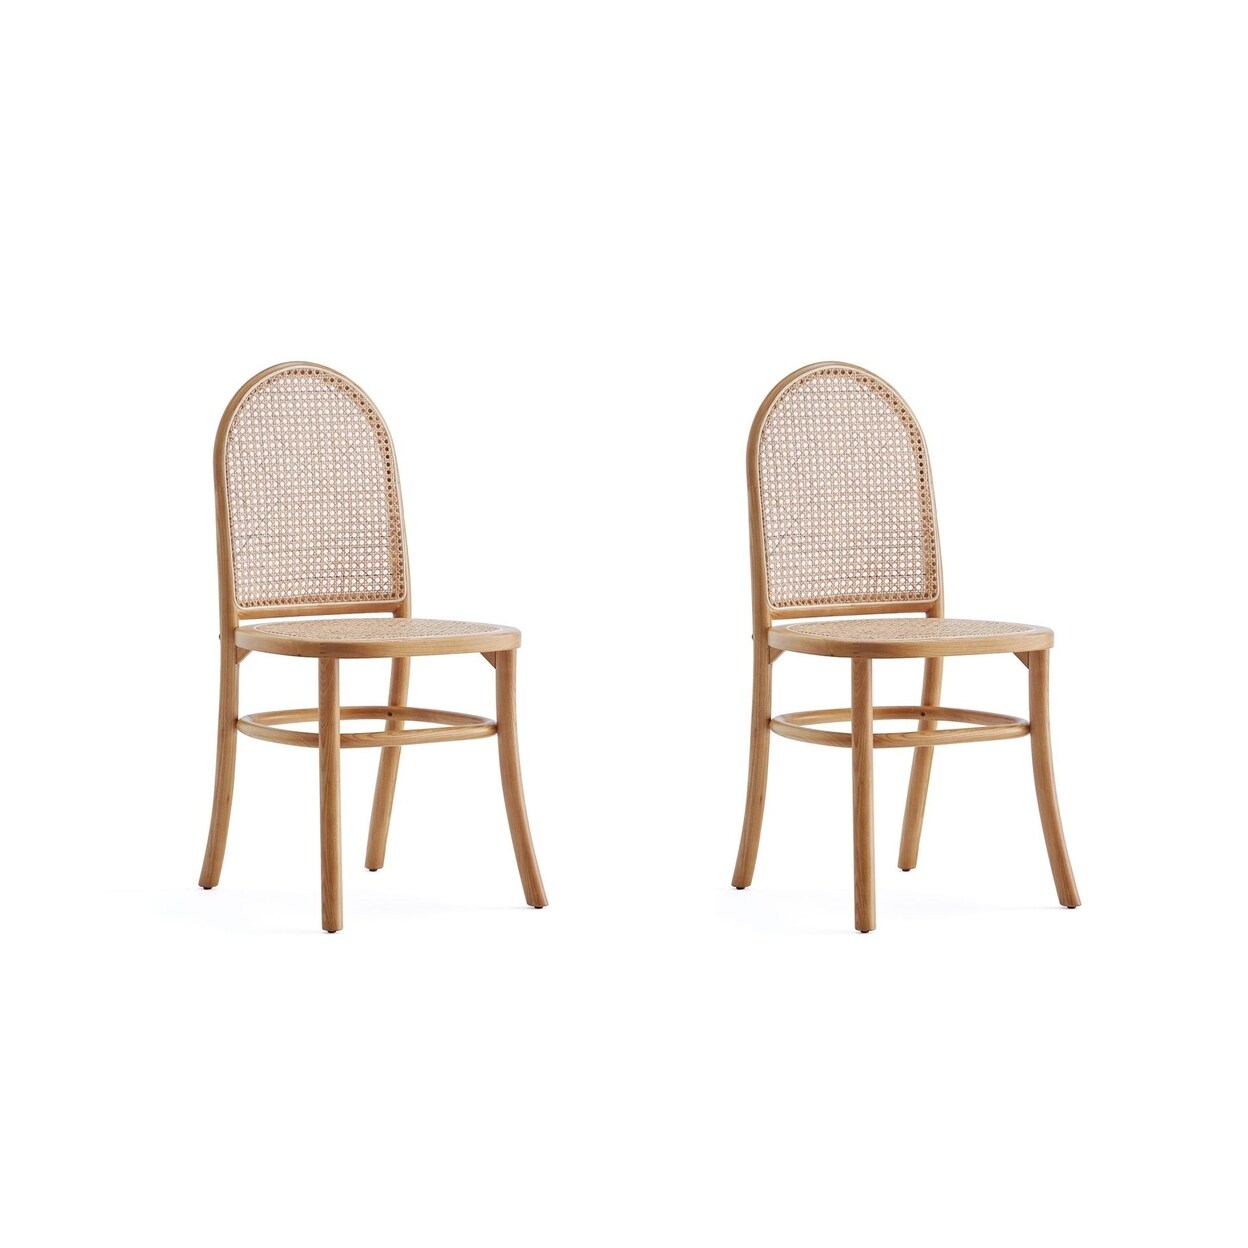 Manhattan Comfort Paragon Dining Chair 2.0 and Cane - Set of 2